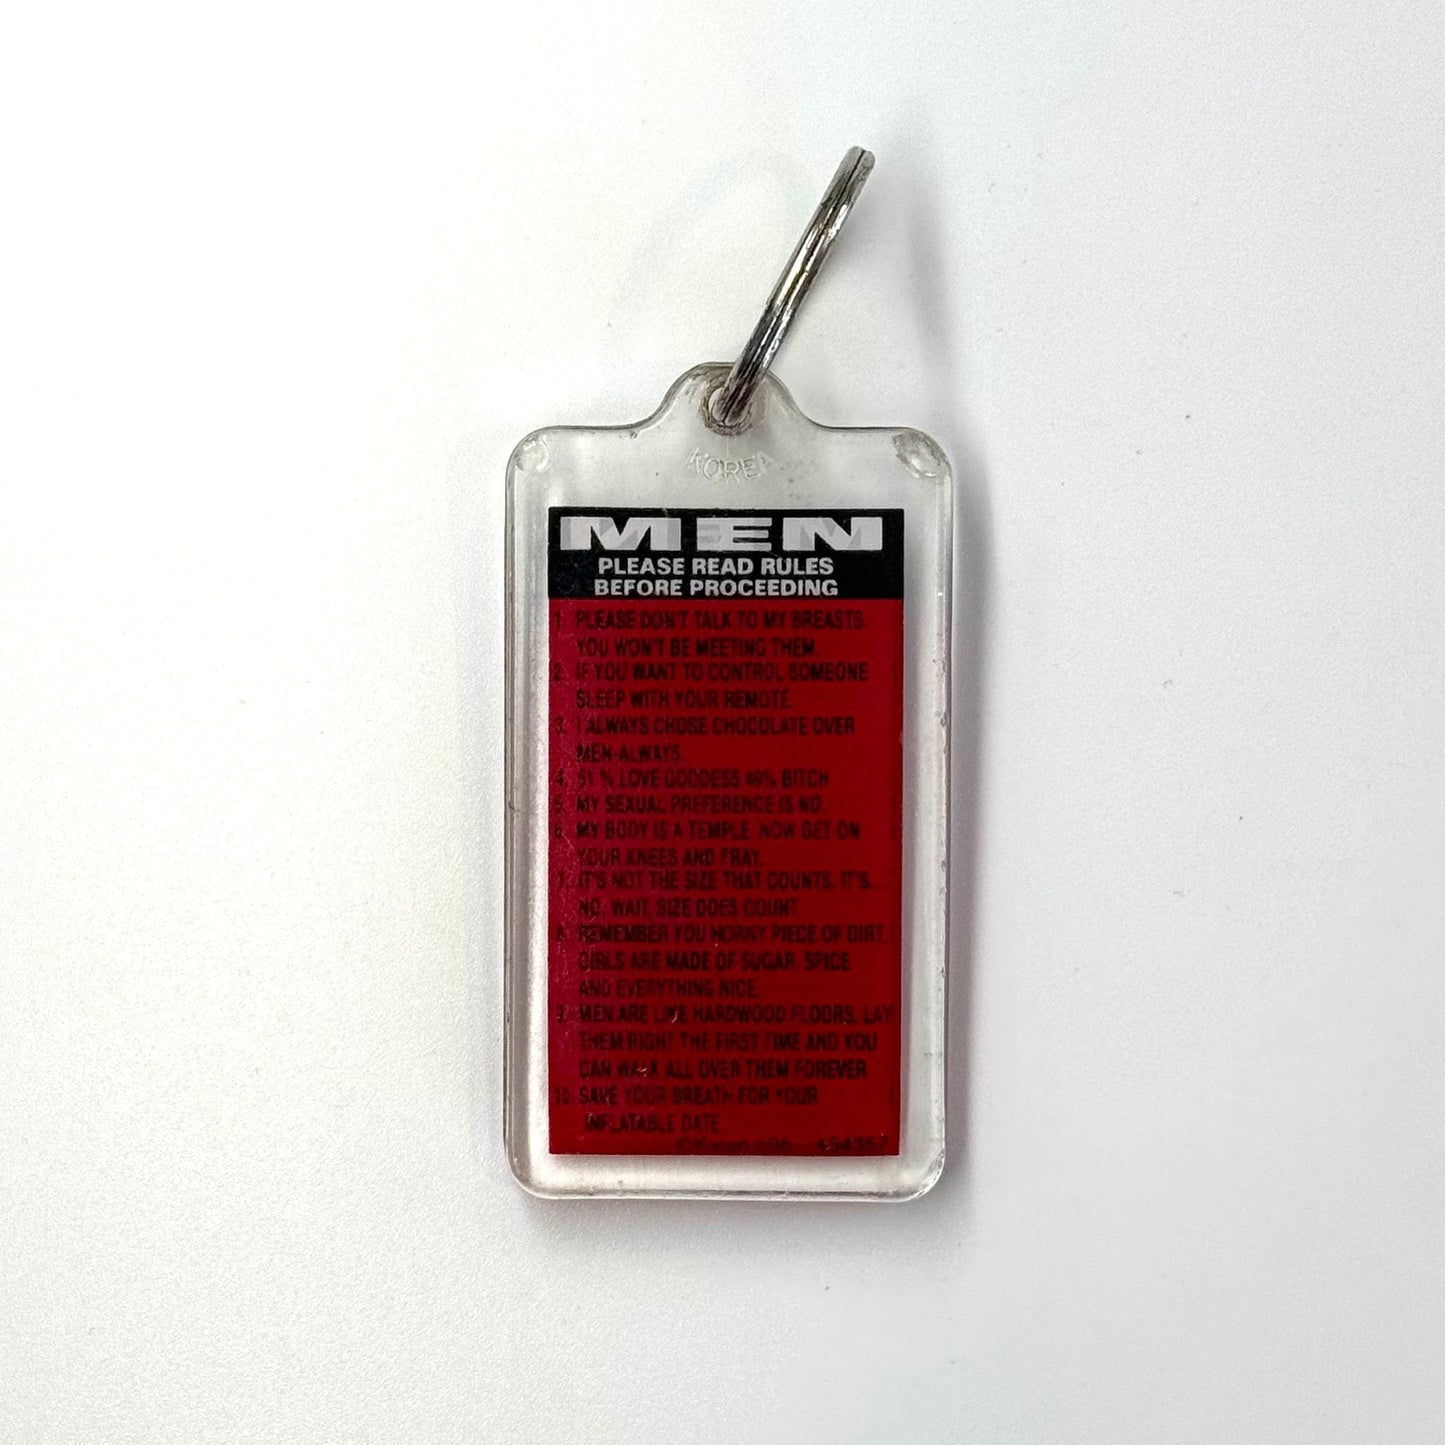 Vintage Novelty Adult Humor Keychain “Rules for MEN” Key Ring Rectangle Clear Acrylic